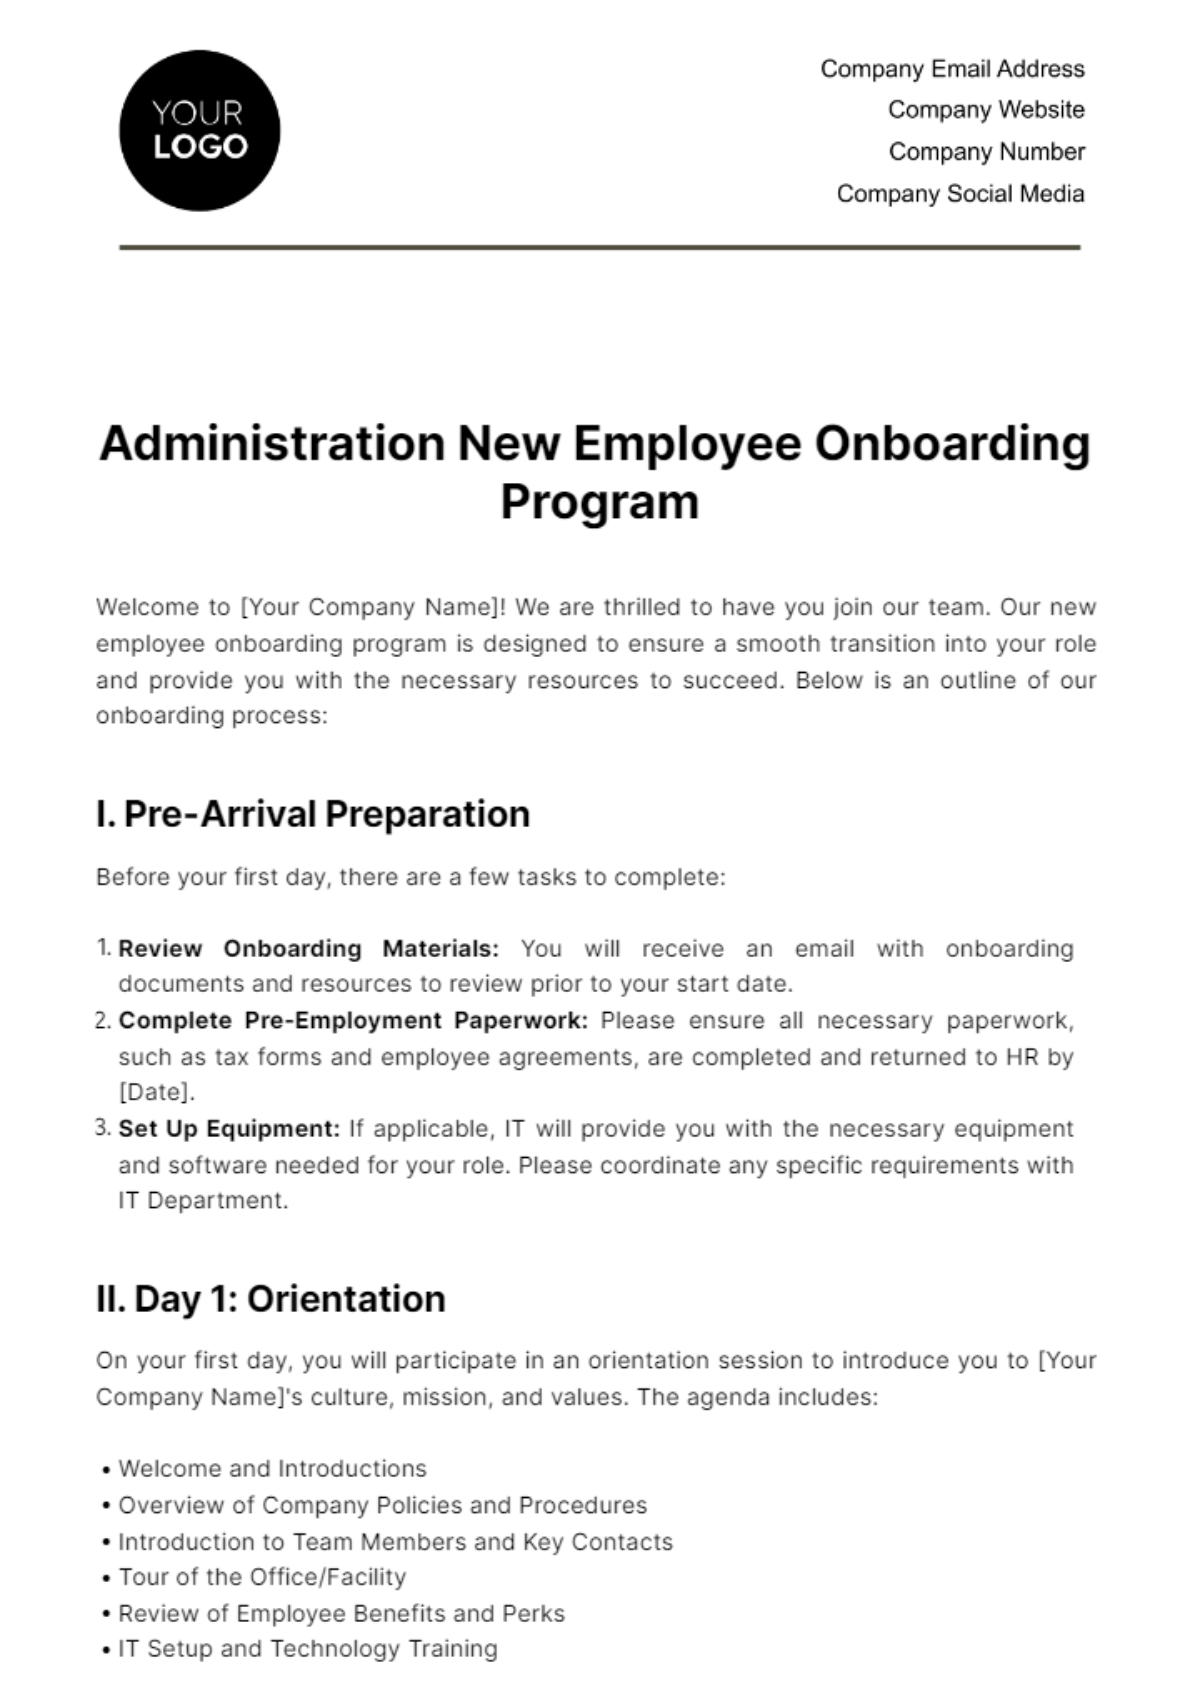 Administration New Employee Onboarding Program Template